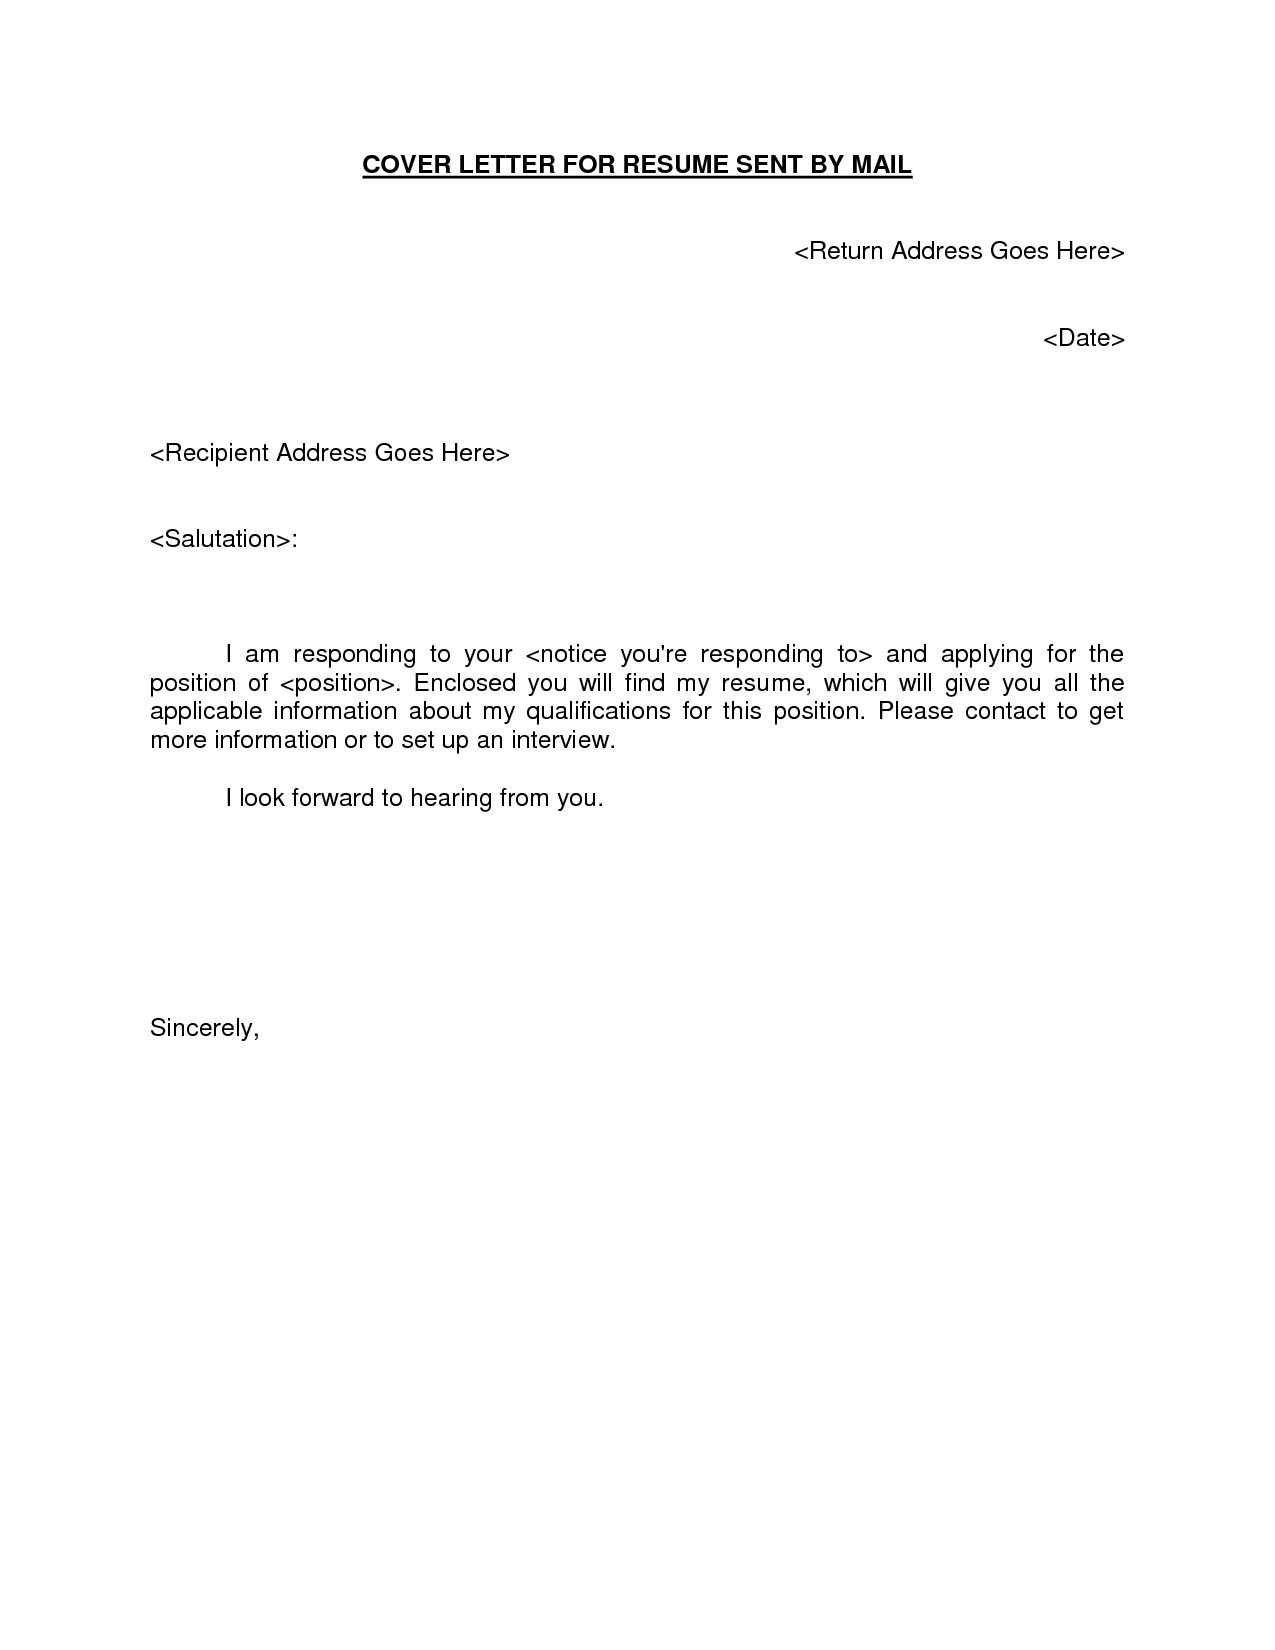 Sample Letter to Send Resume by Email 25lancarrezekiq Email Cover Letter Cover Letter for Resume, Email Cover …